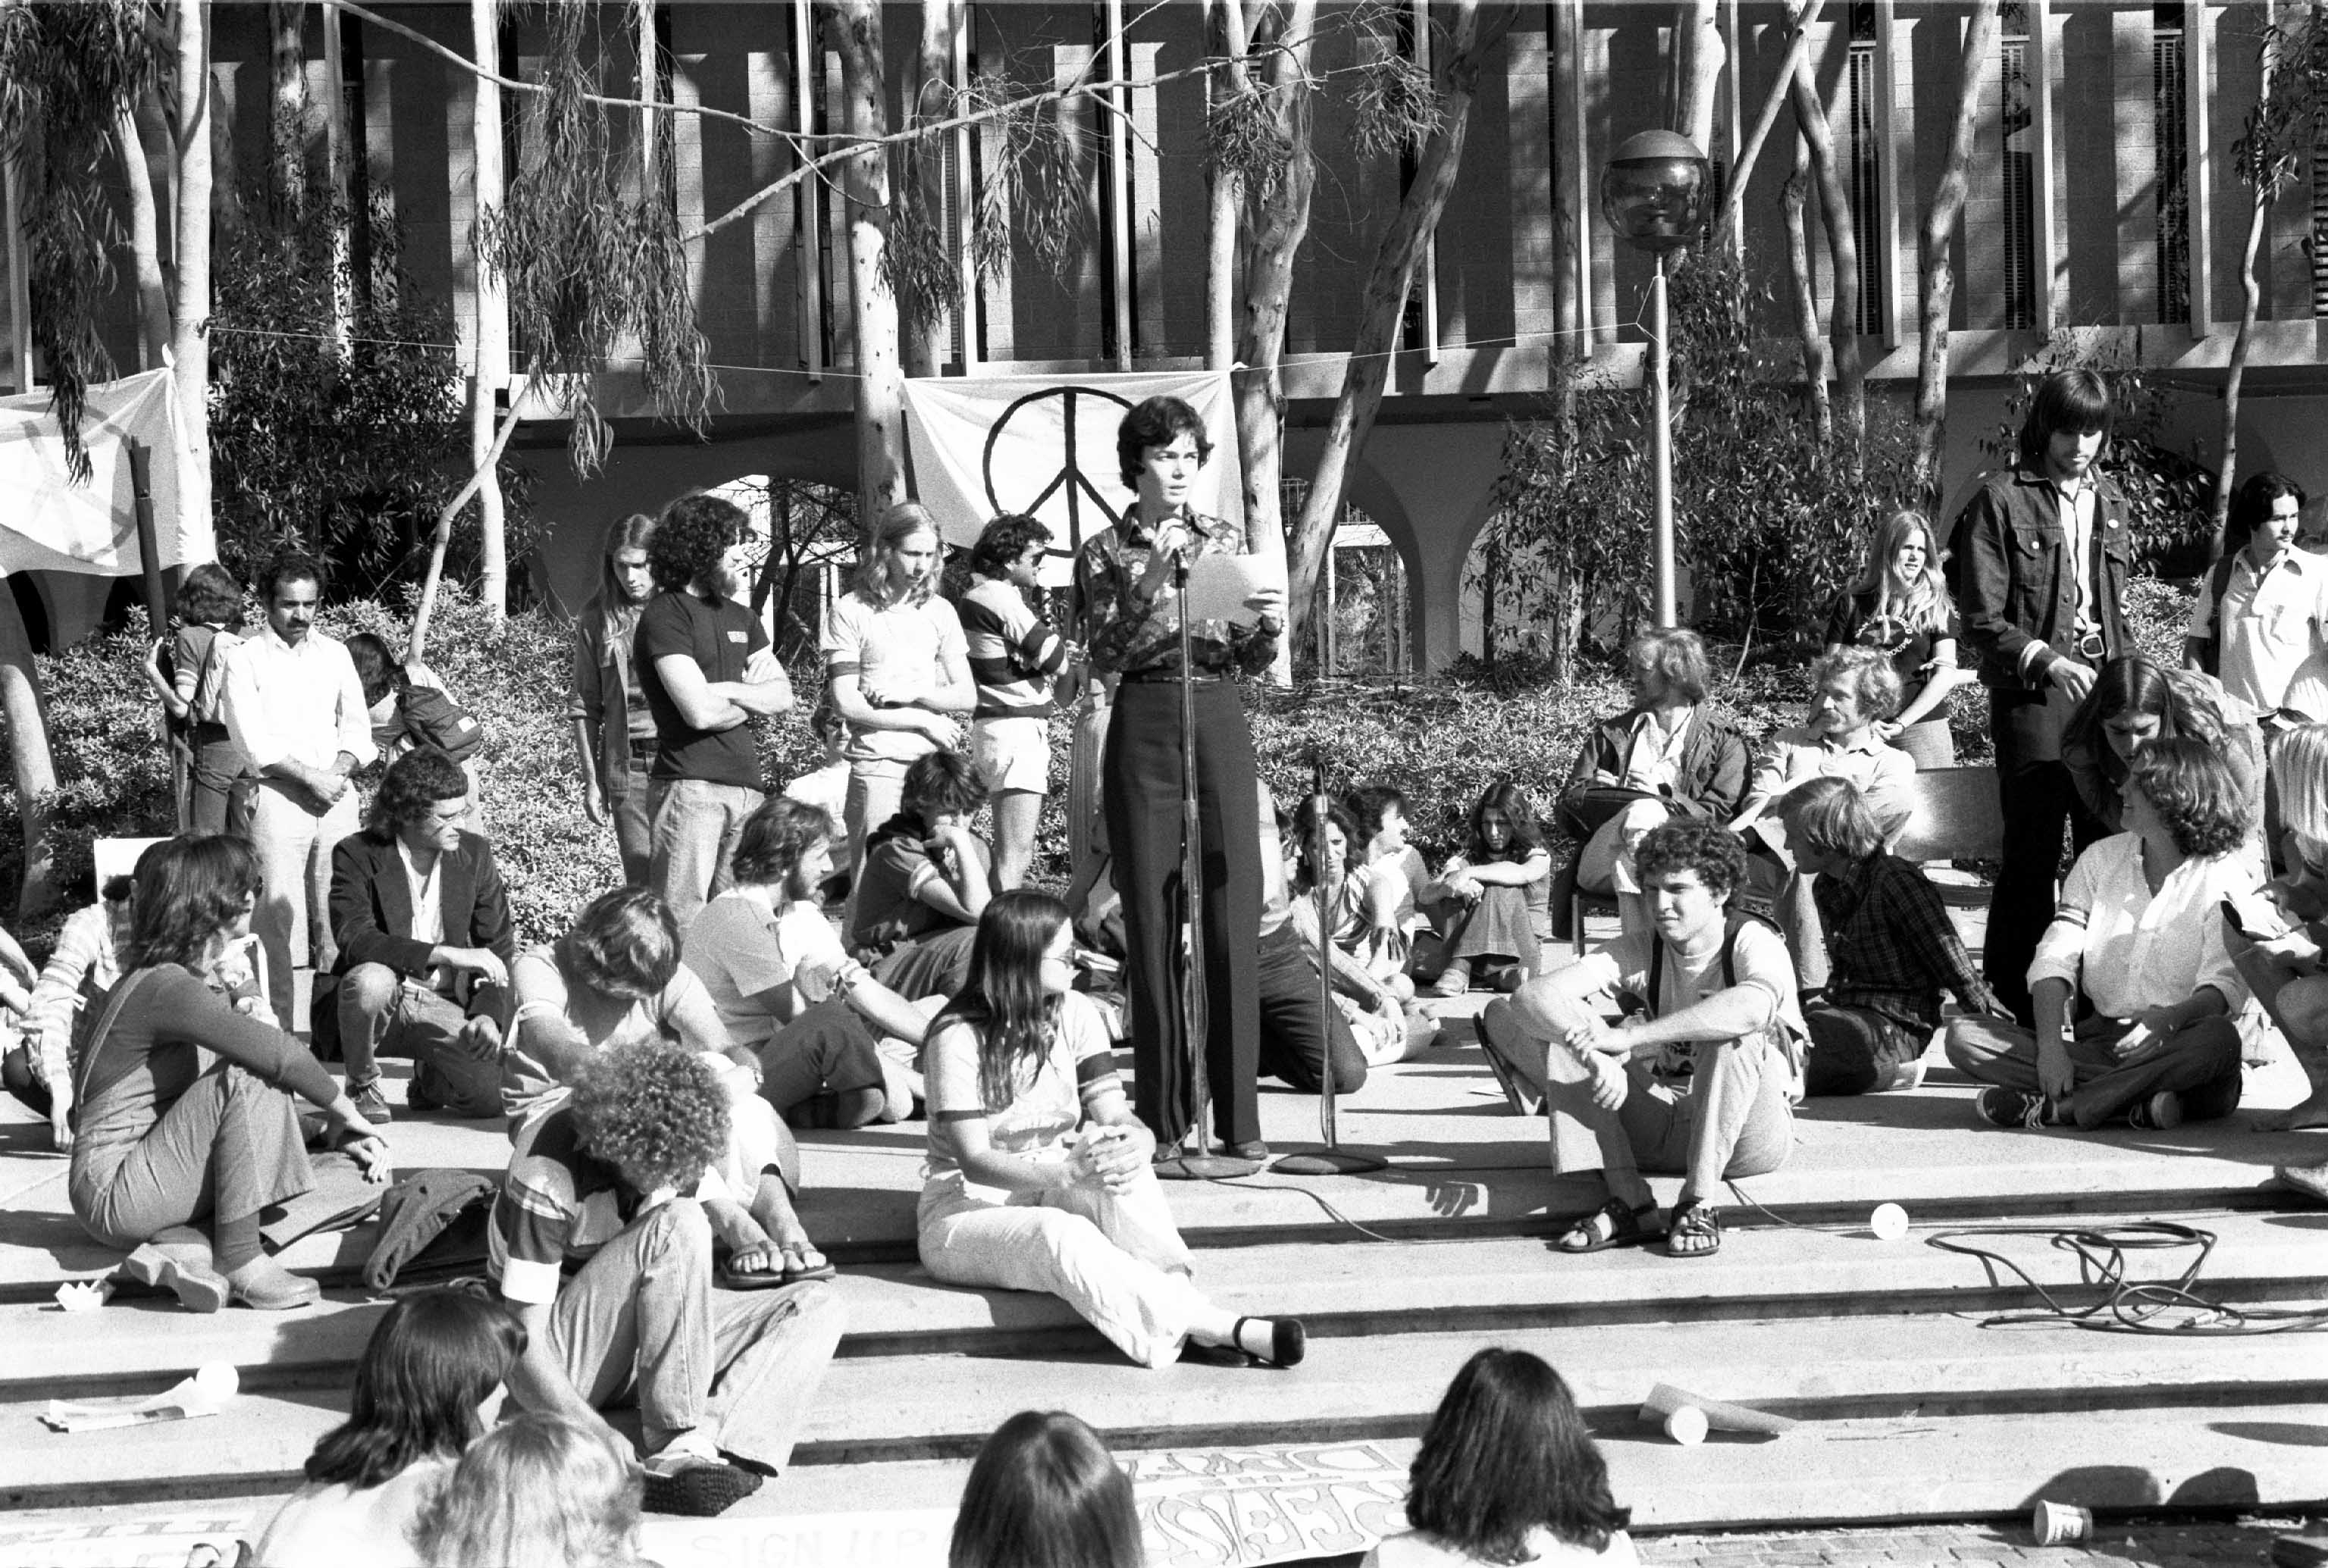 [Image 1. Anti war protests at the University of California, San Diego, 1970. Credits: Fred Lonidier]